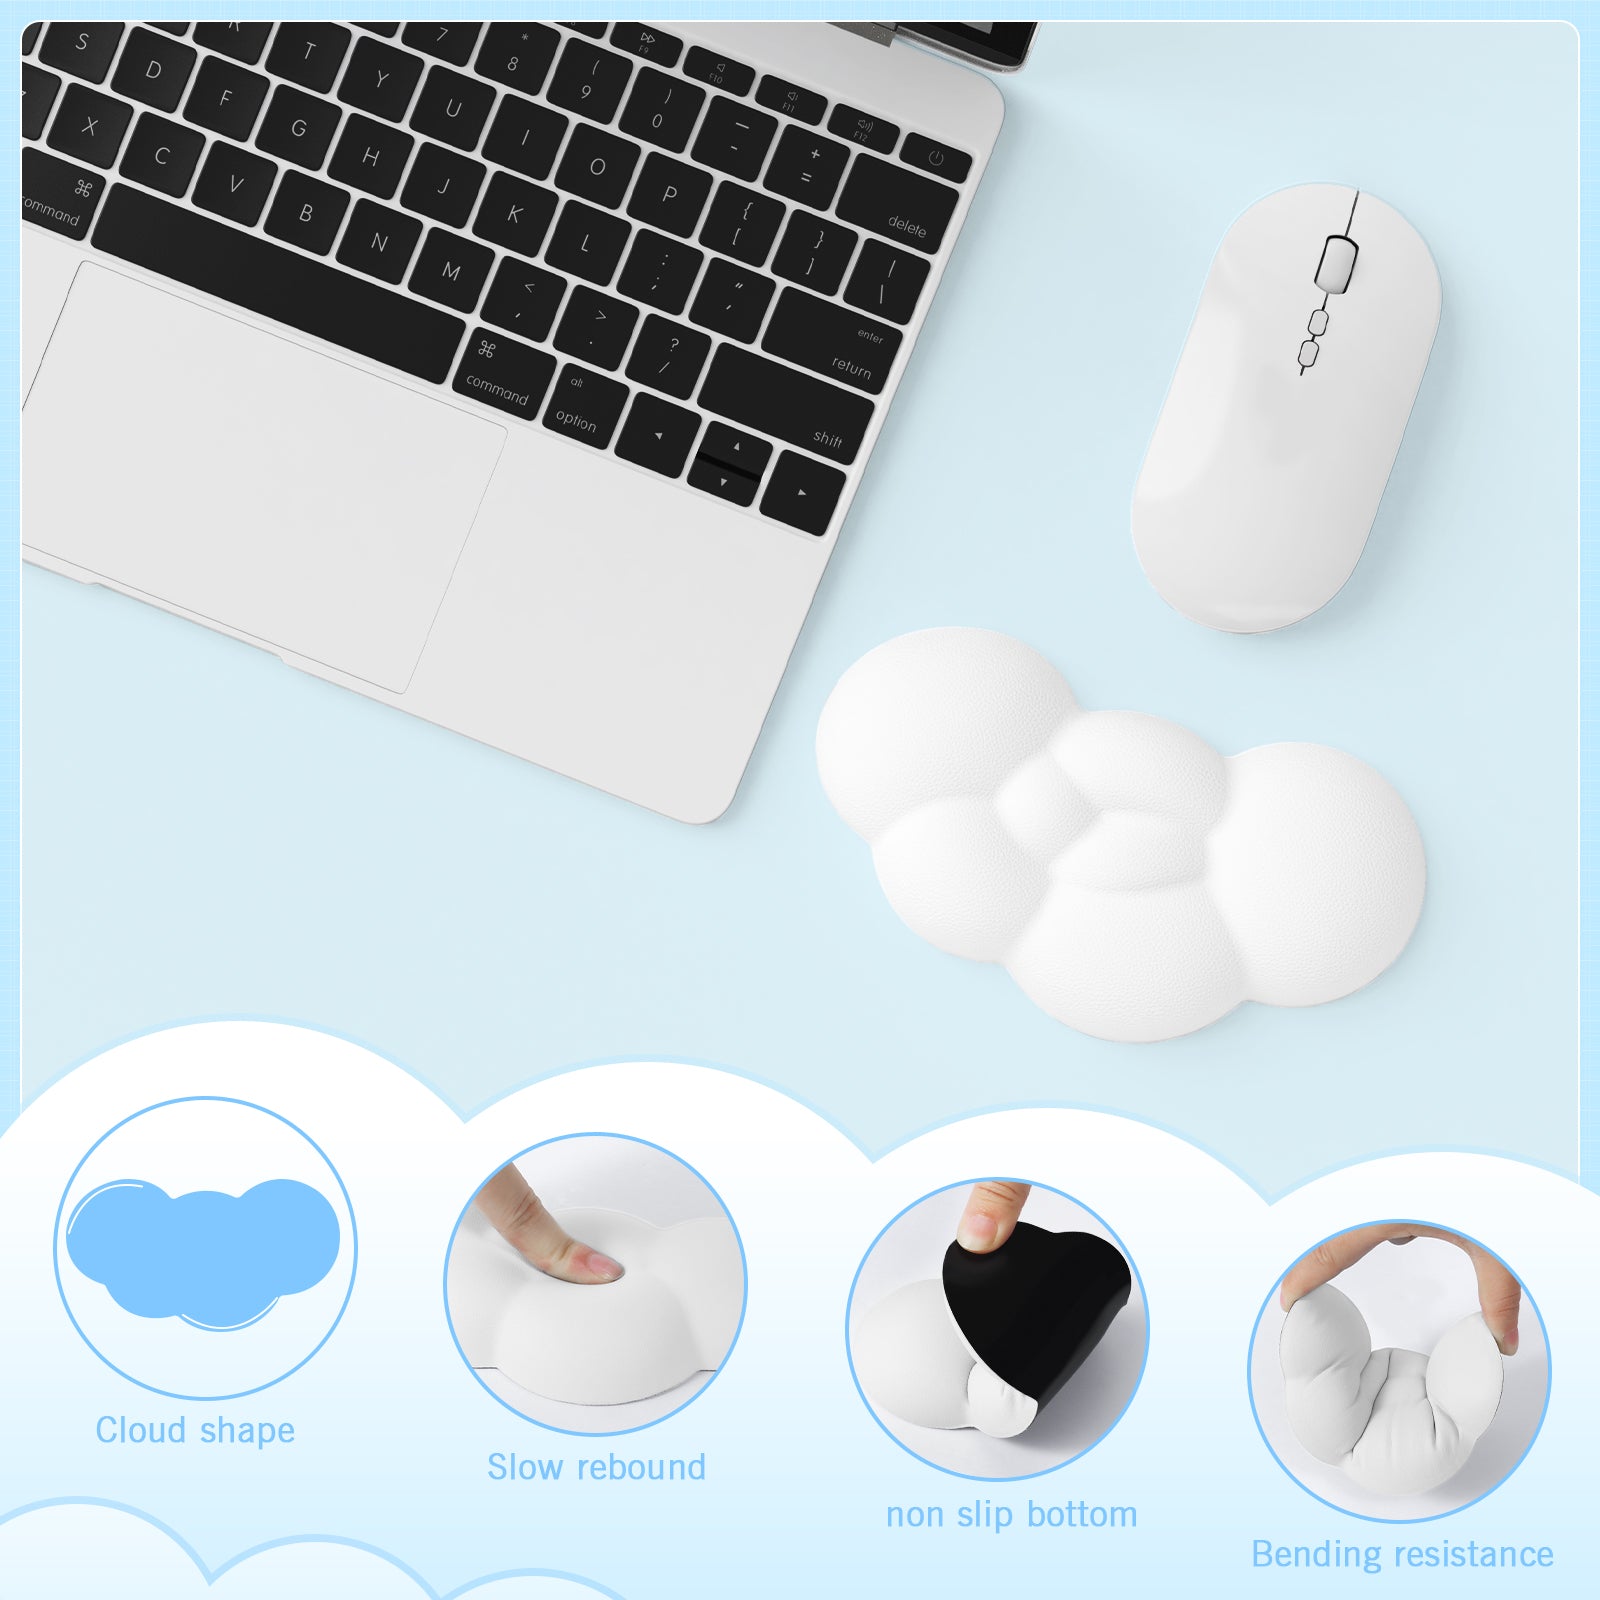 MAMBASNAKE Cloud Wrist Rest for Keyboard and Mouse, 2 in 1 Mouse pad Rests with Coaster, Ergonomic Design for Typing Pain Relief